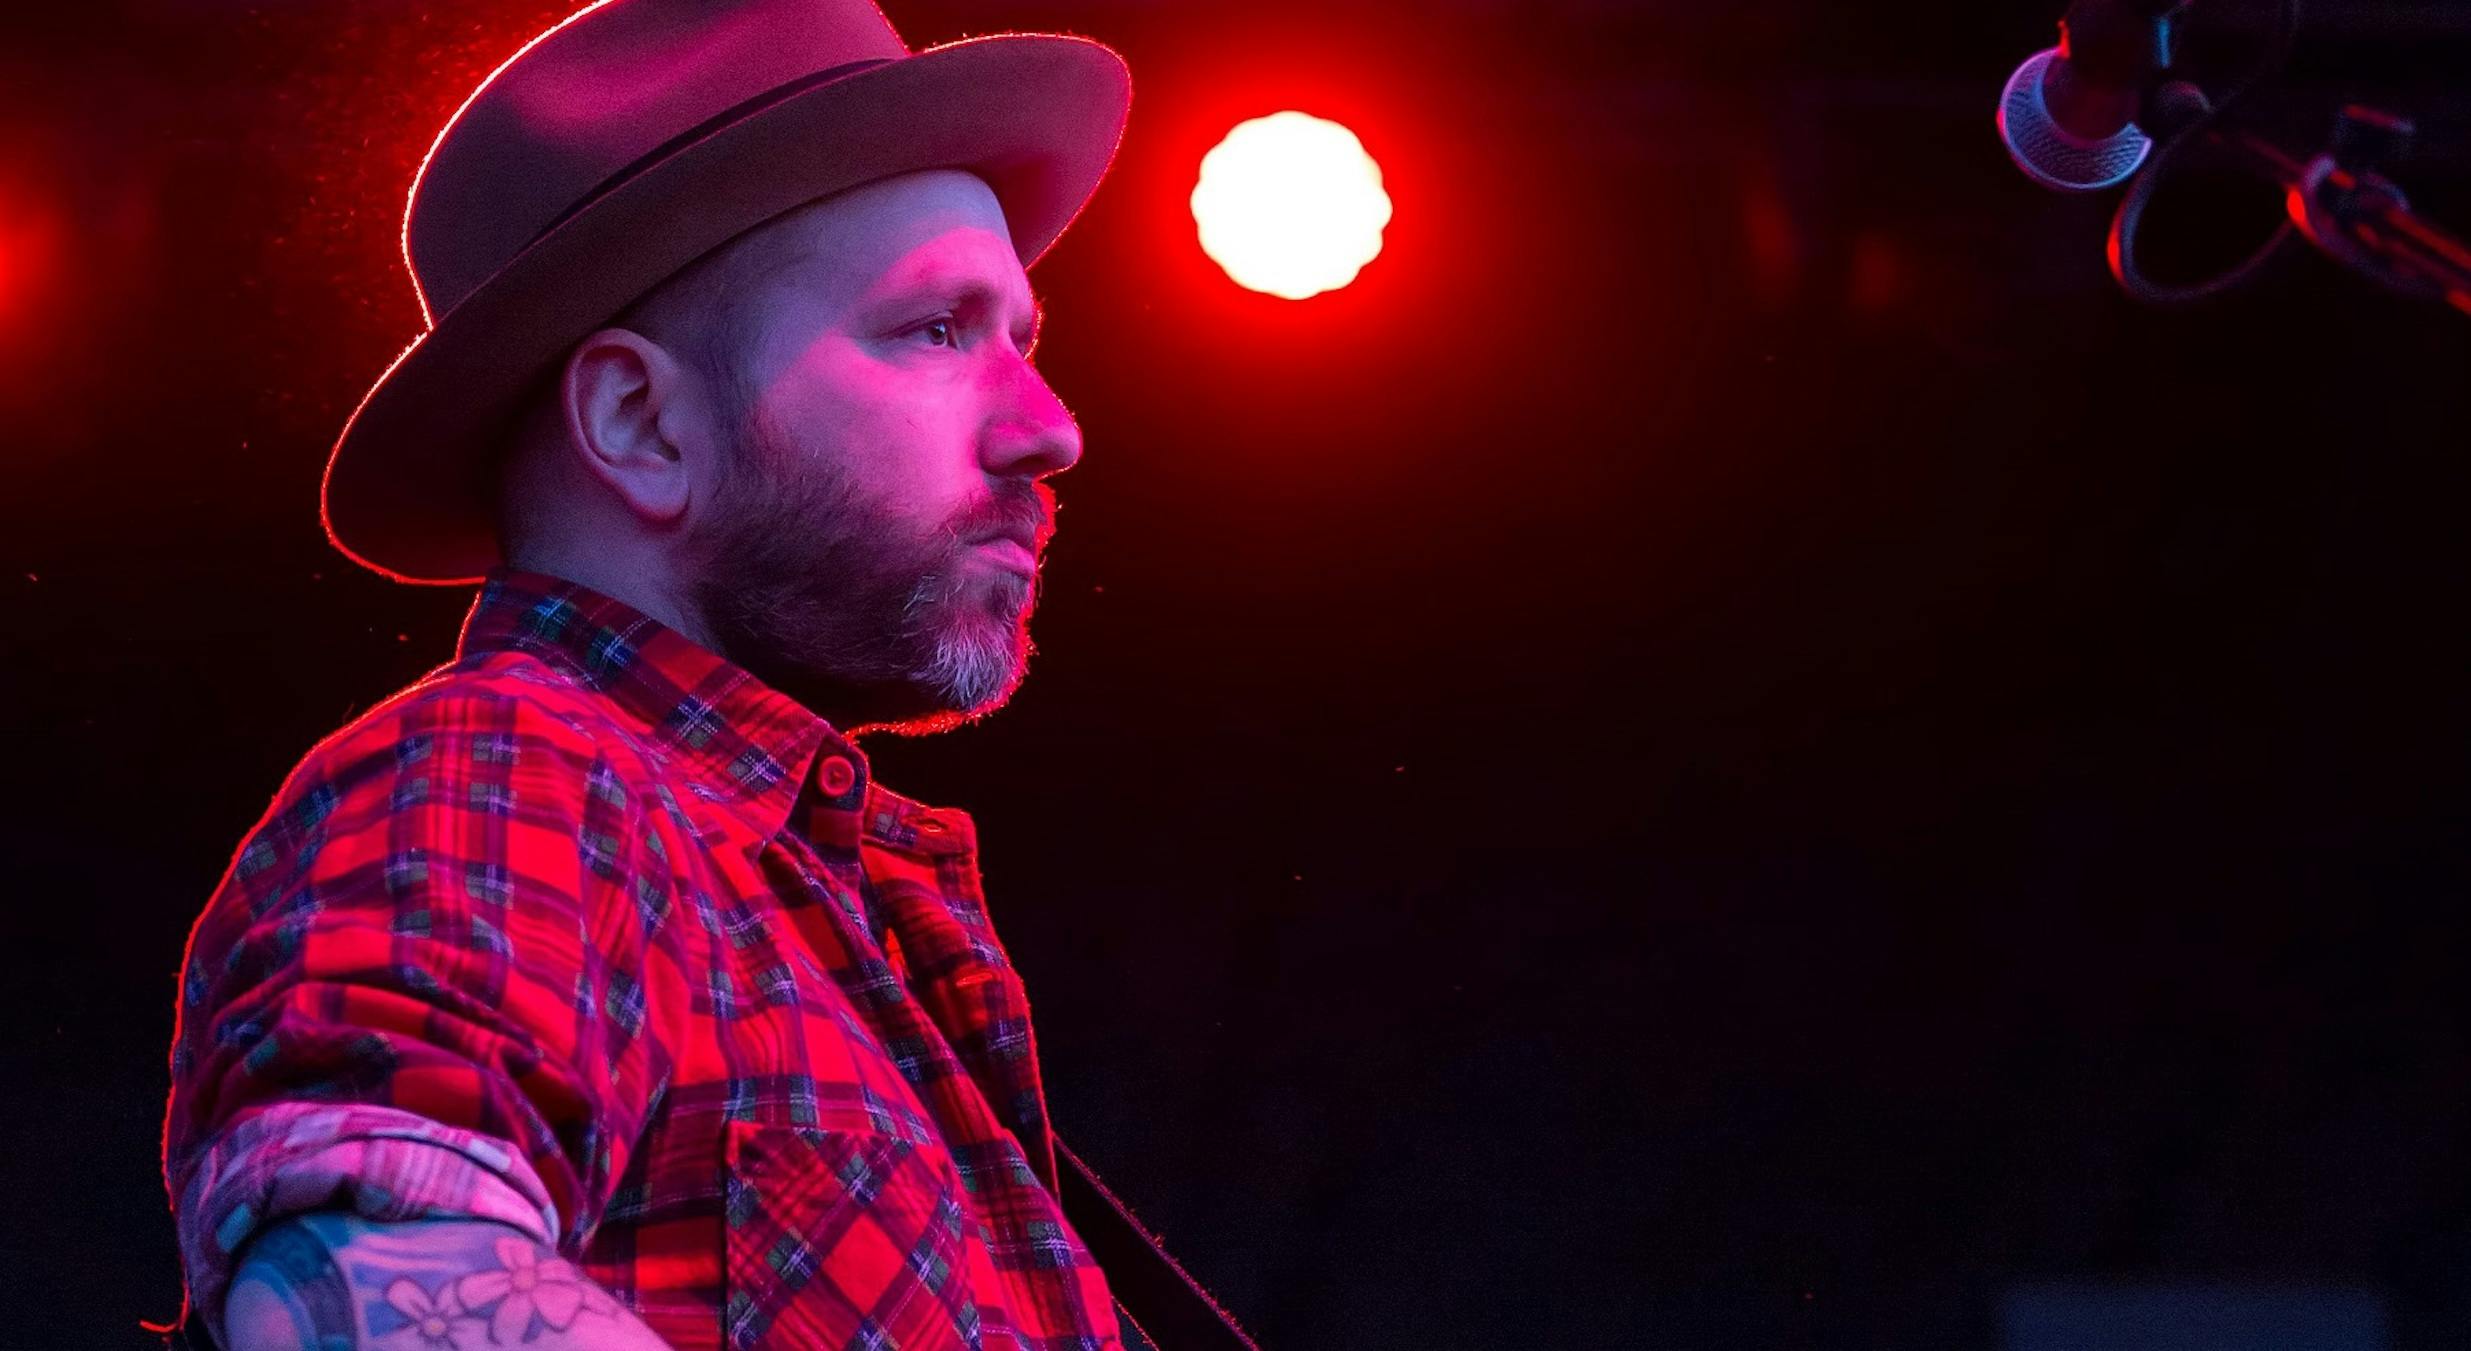 City And Colour Return With New Single And North American Tour Announcement